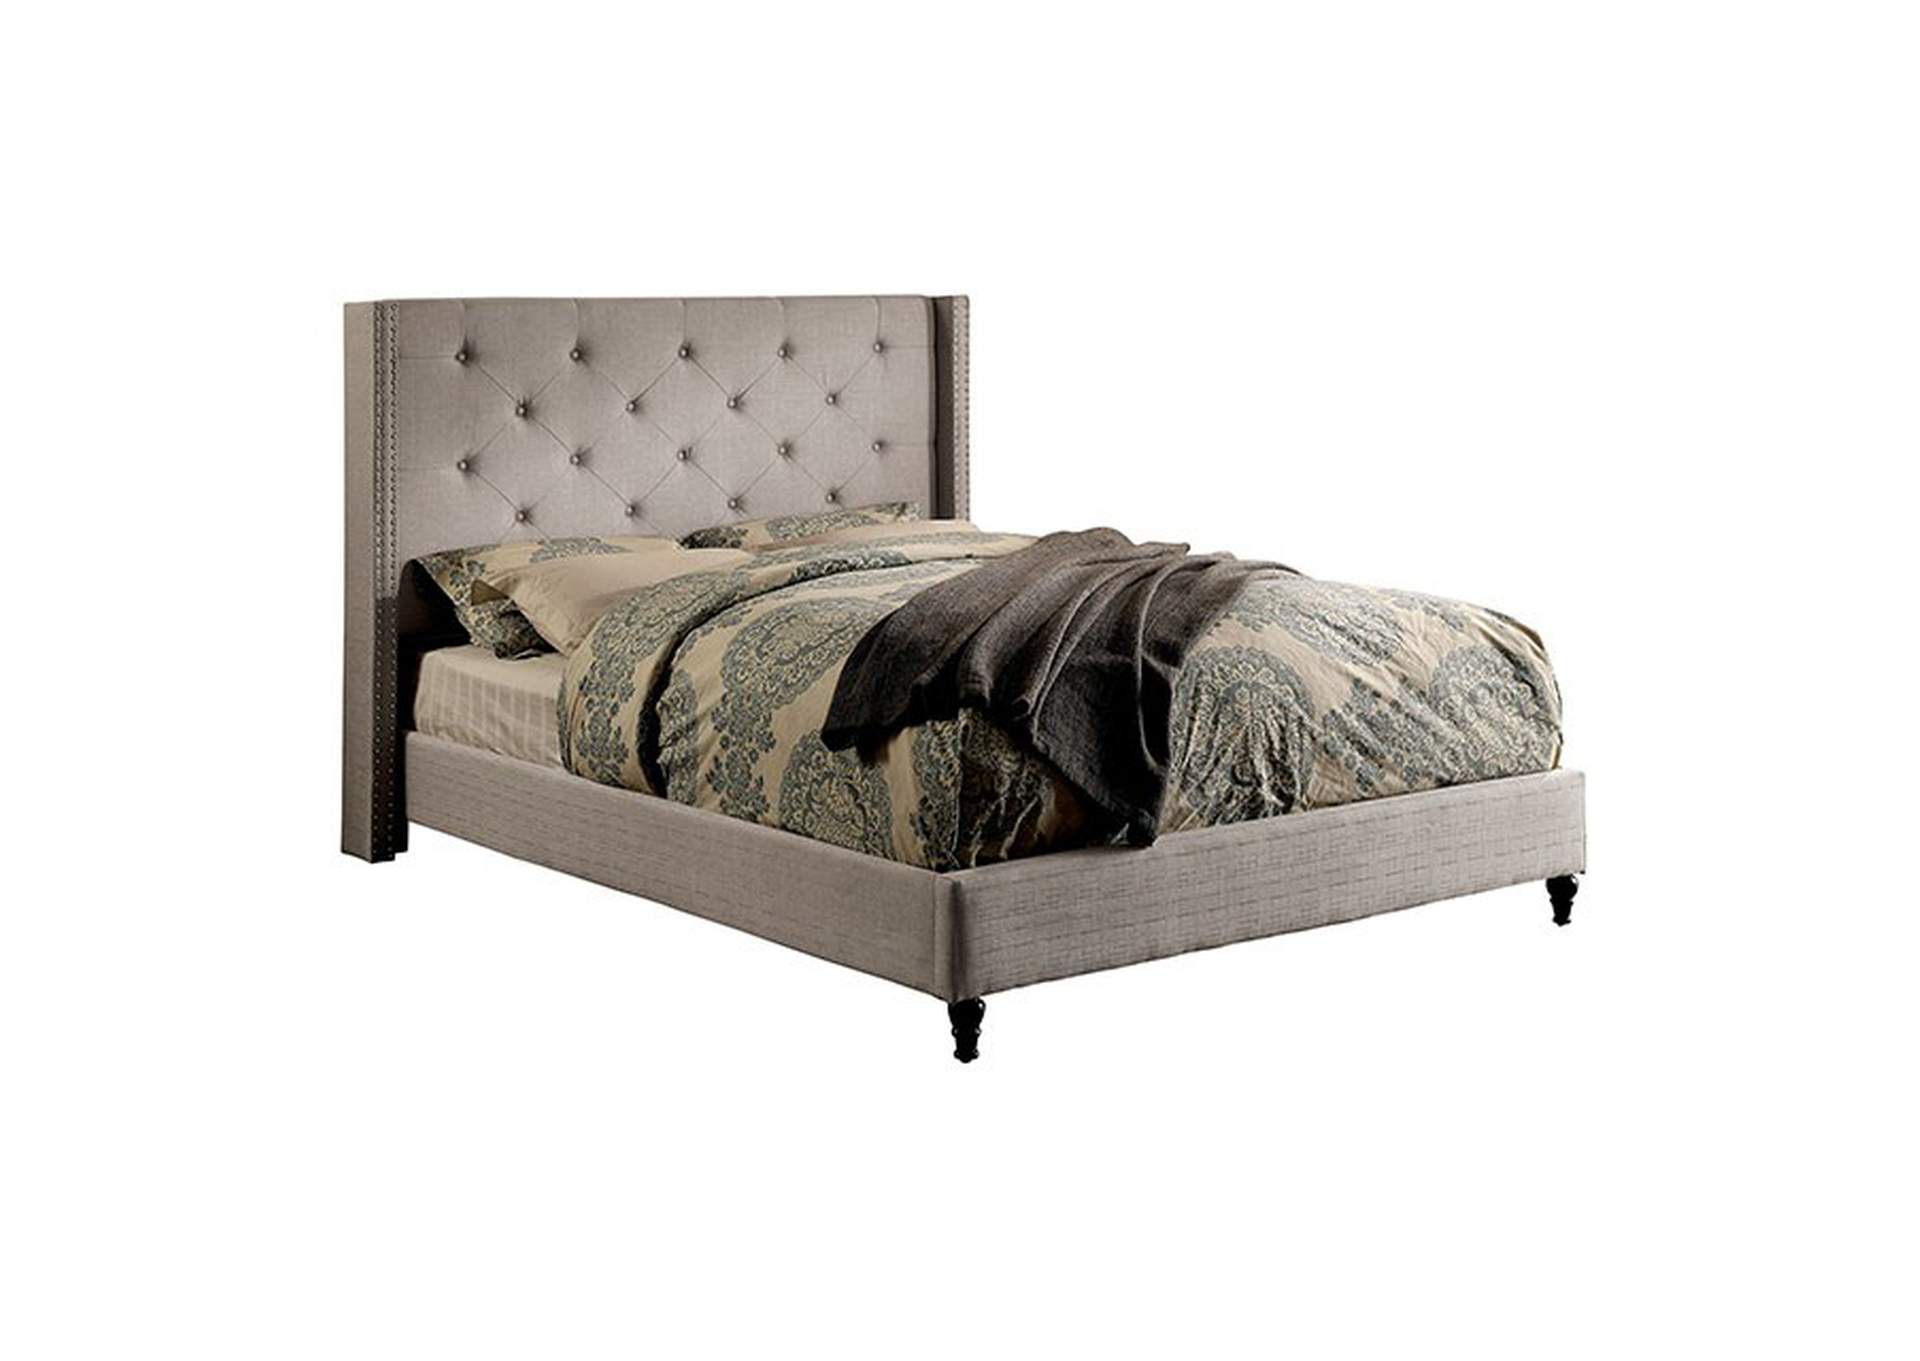 Anabelle Warm Gray Eastern King Bed,Furniture of America